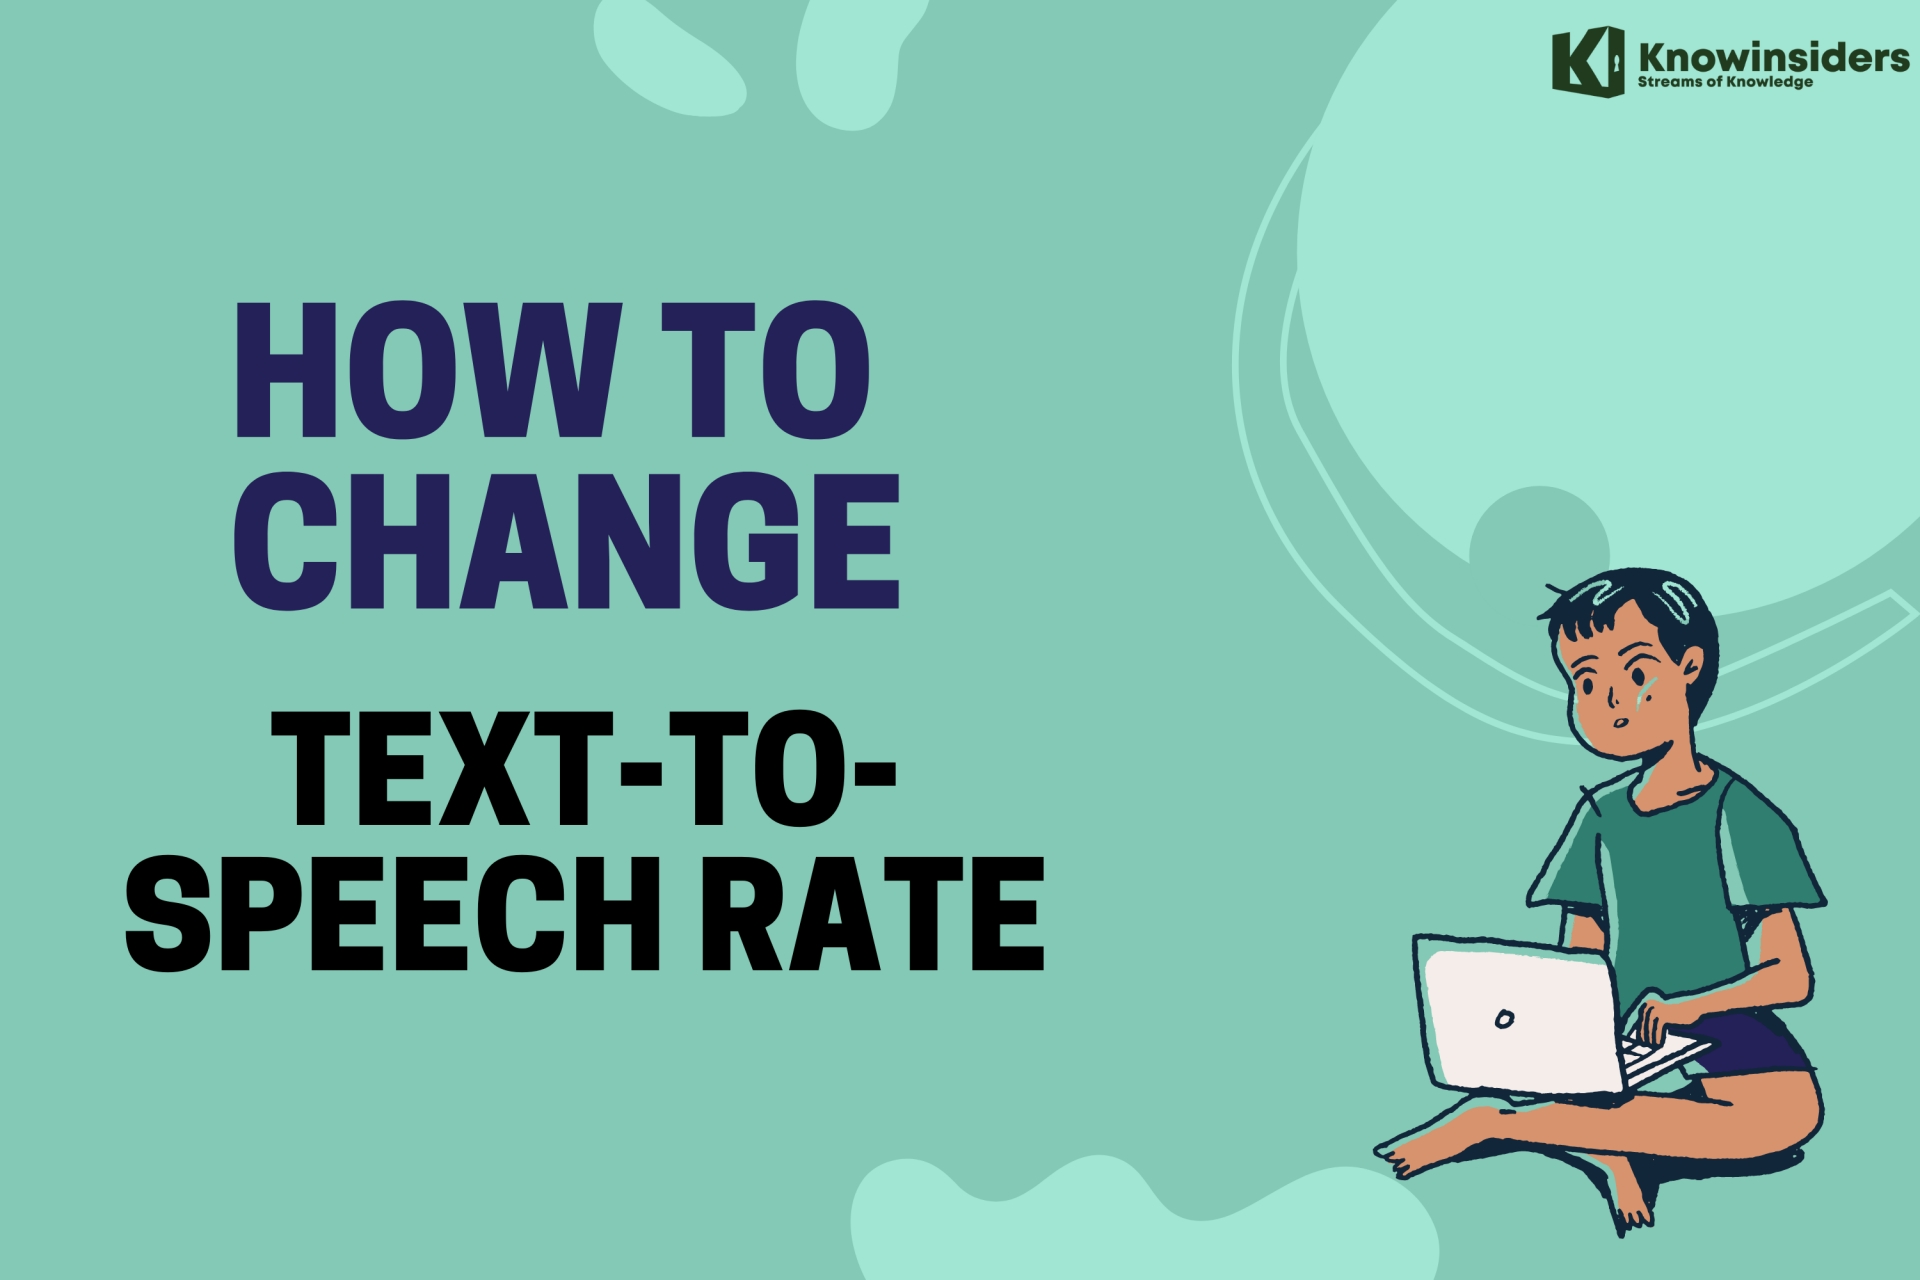 How to Change Your Text-to-Speech Rate On Desktop